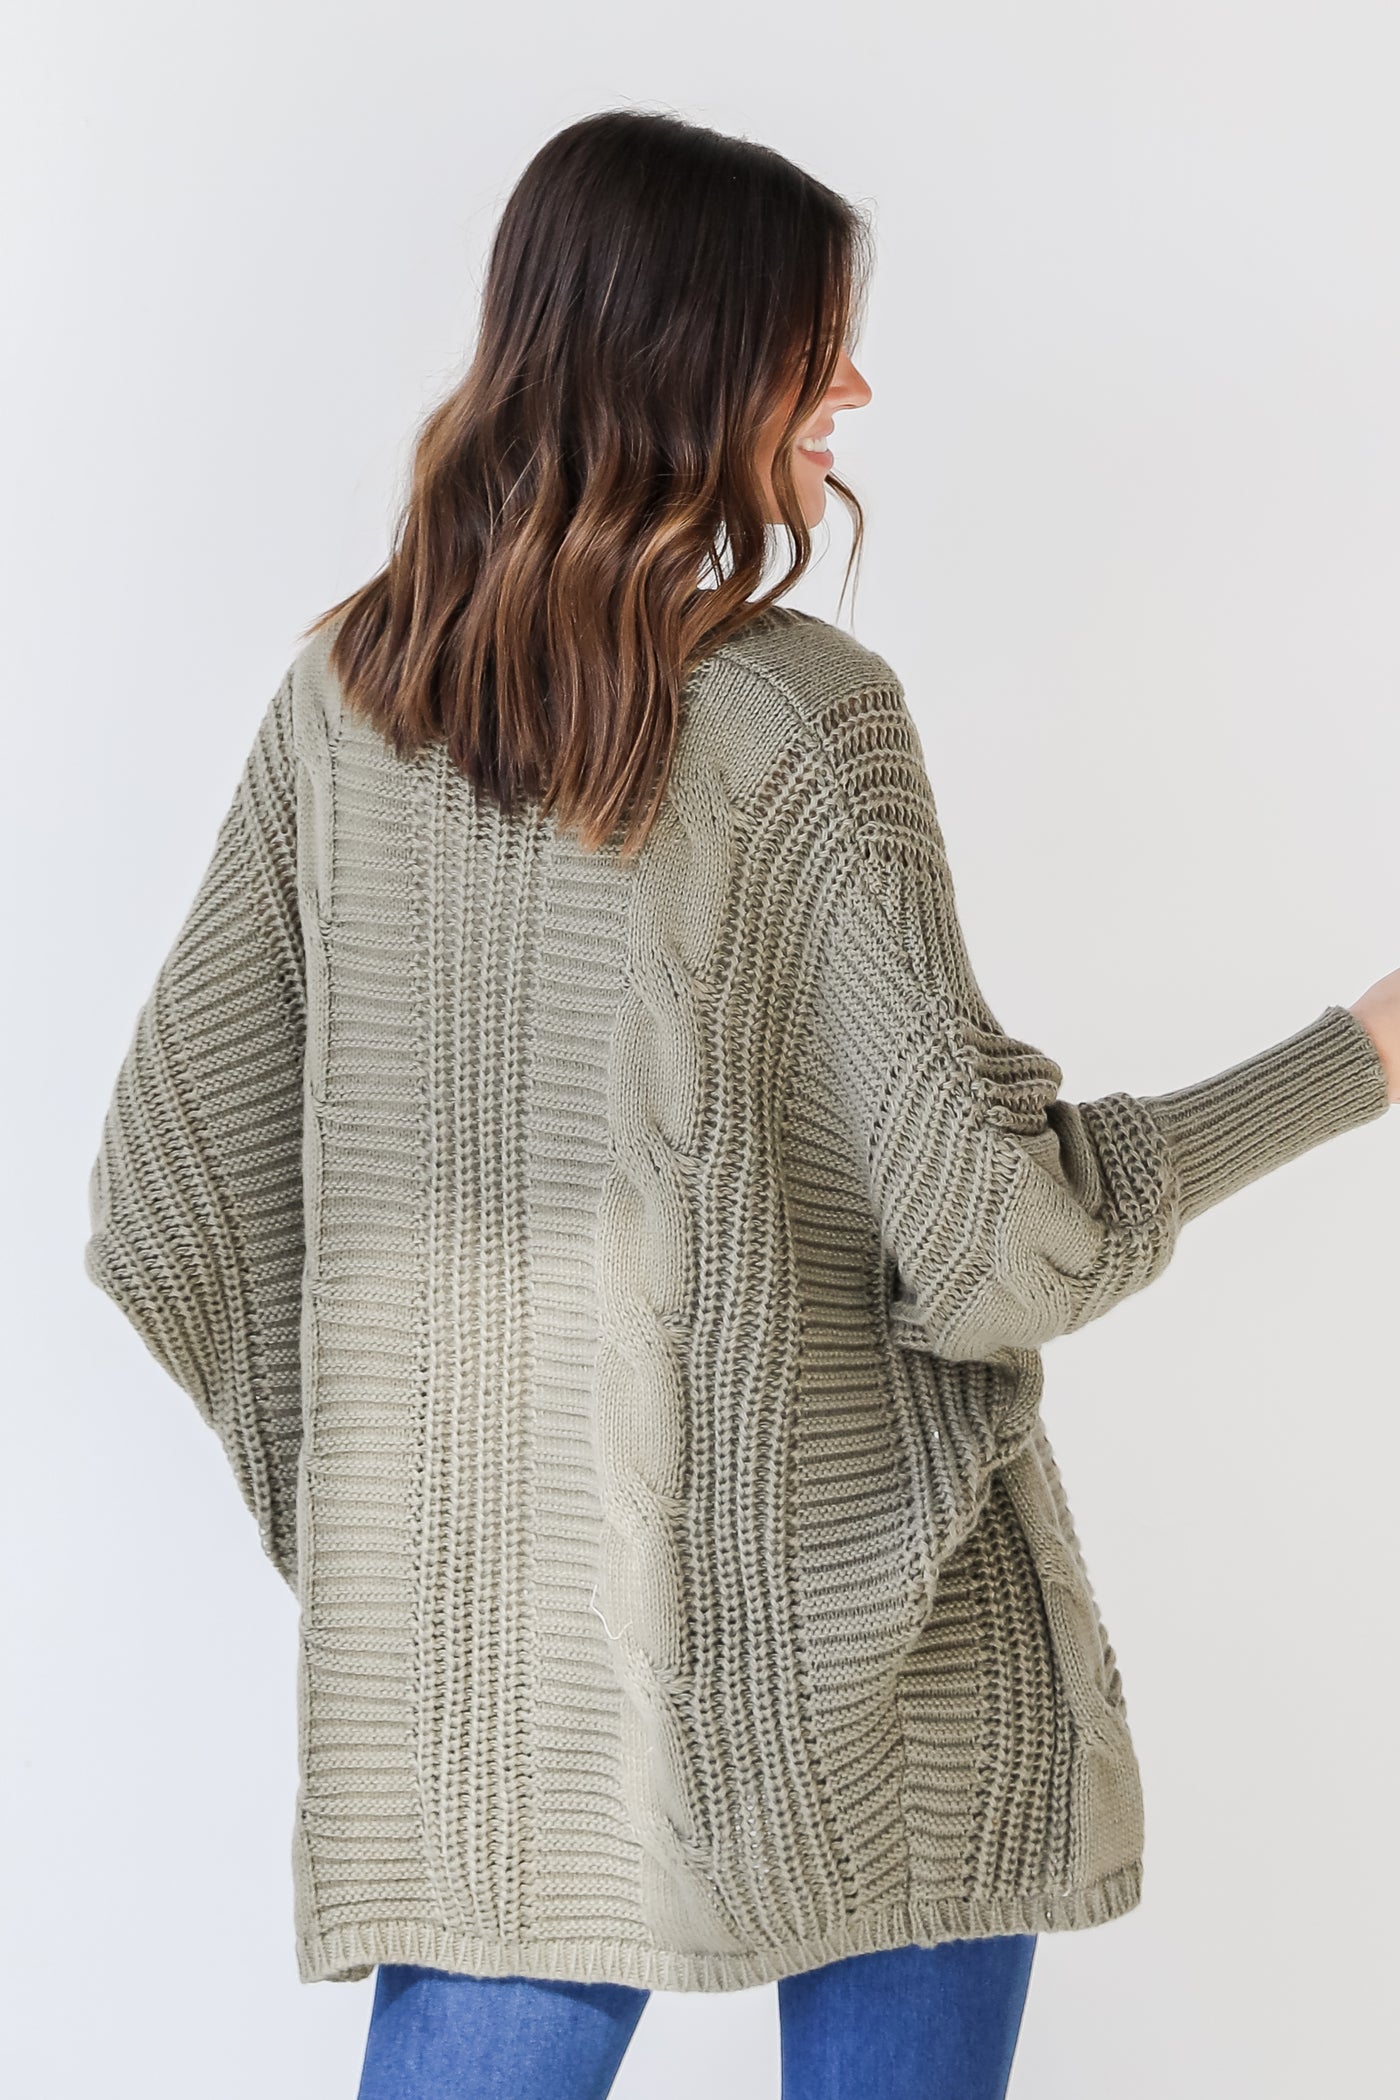 Sweater Cardigan in olive back view